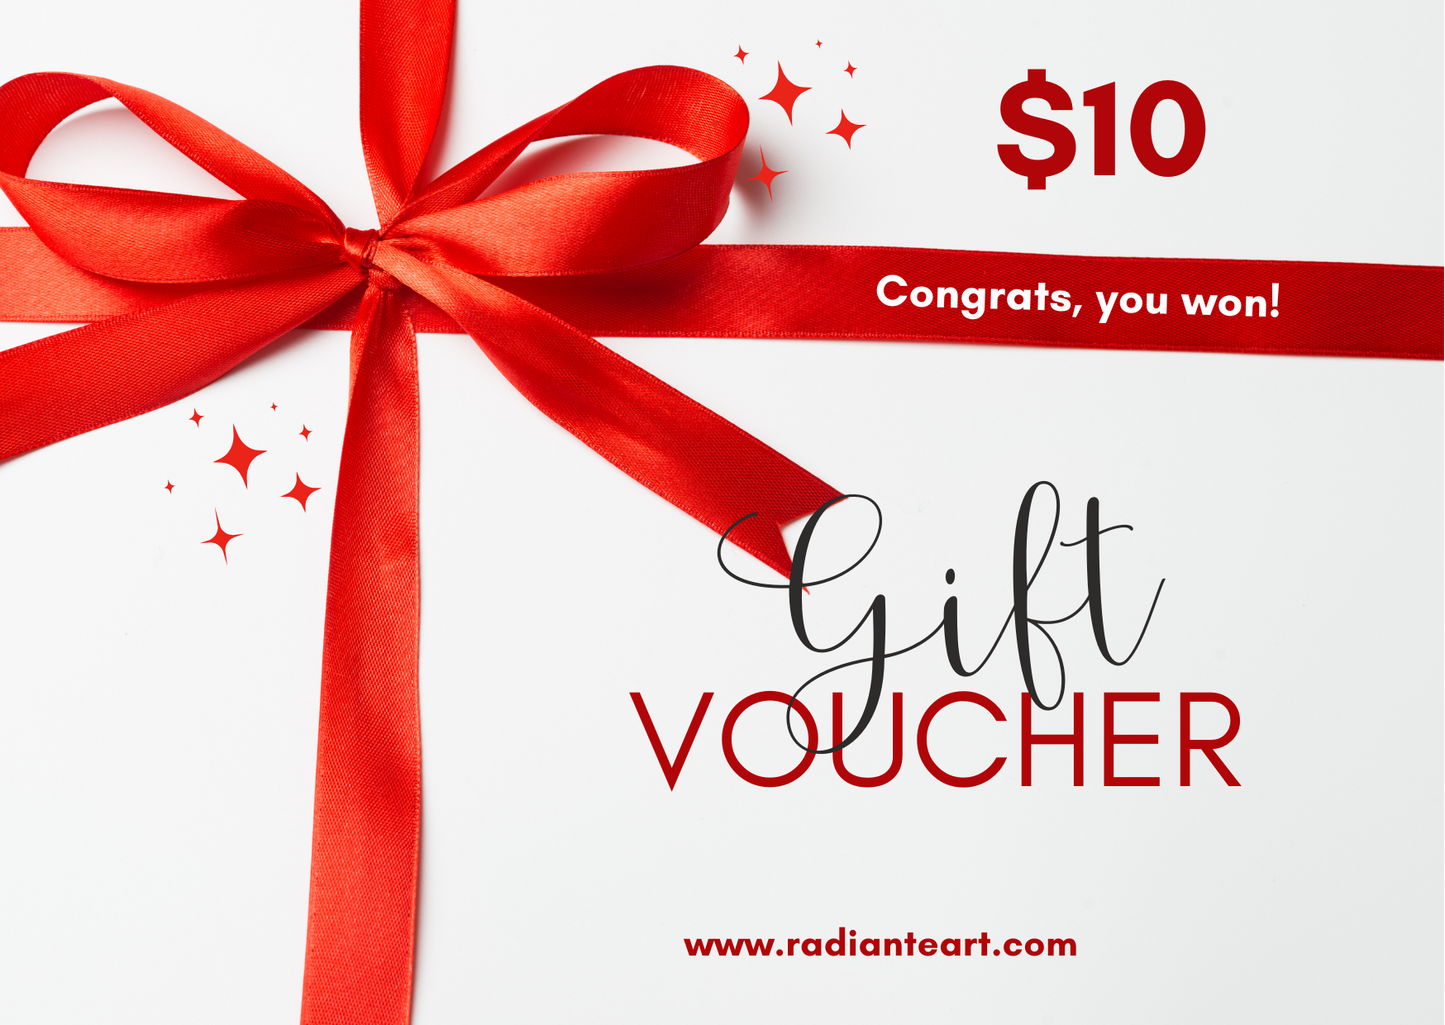 YOU RECEIVED THIS GIFT CARD FROM RADIANTE ART FOR US$ 10